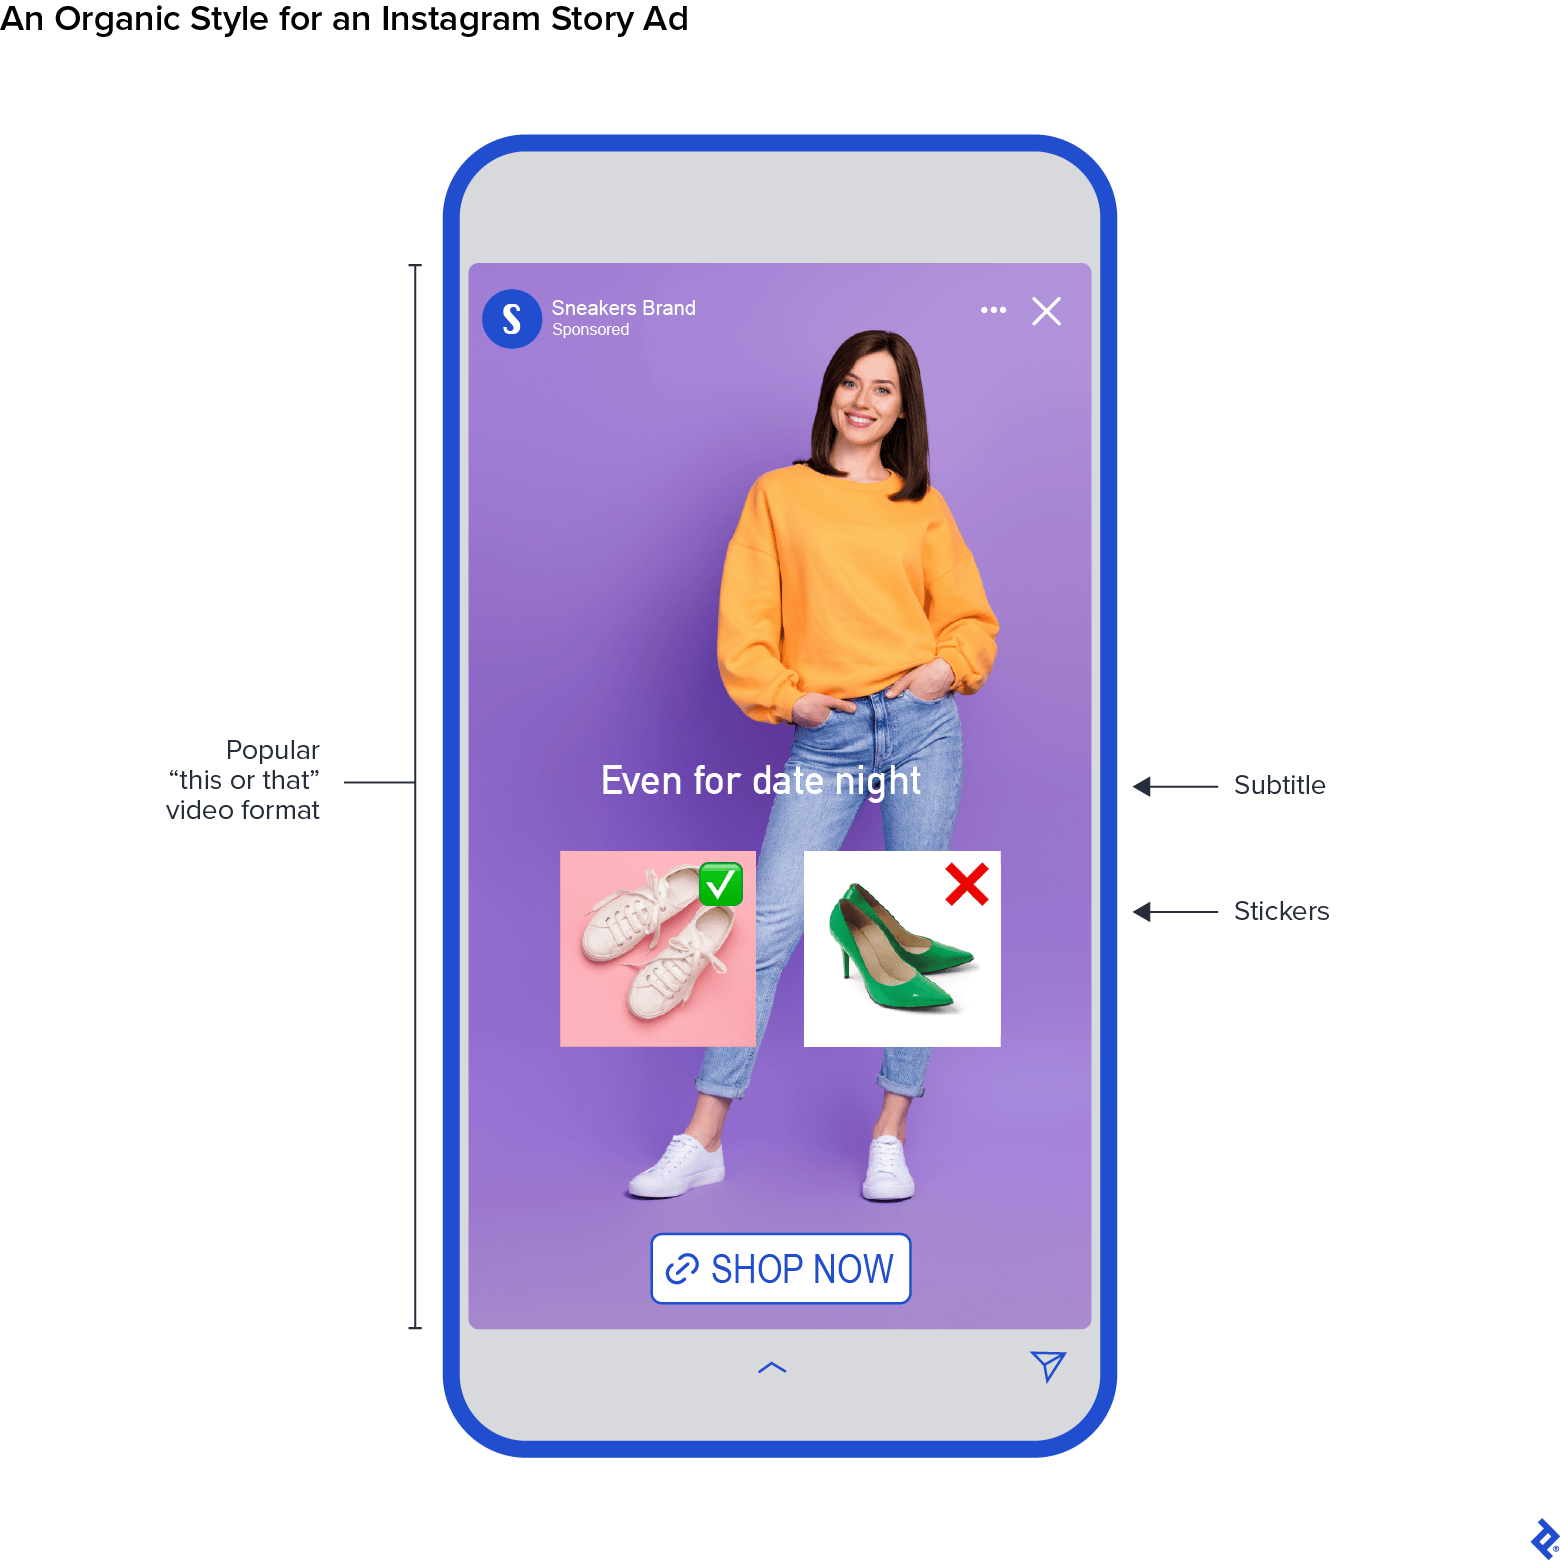 A mobile example of organic styles for an Instagram Stories ad shows a popular video format (a “this or that” comparison), subtitles, and stickers.